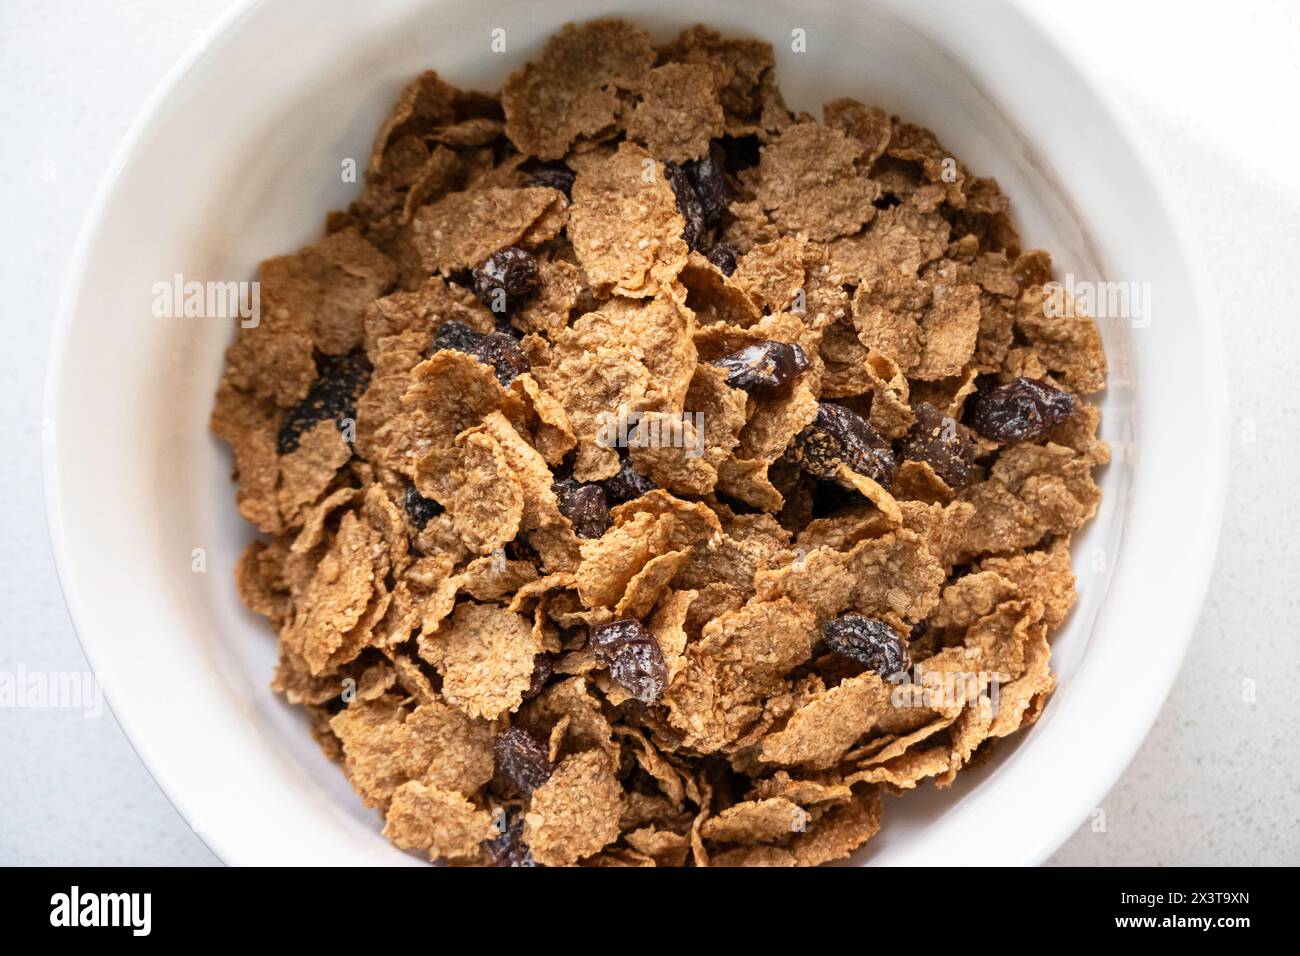 A bowl of Raisin and Bran breakfast cereal without milk. Closeup. USA. Stock Photo